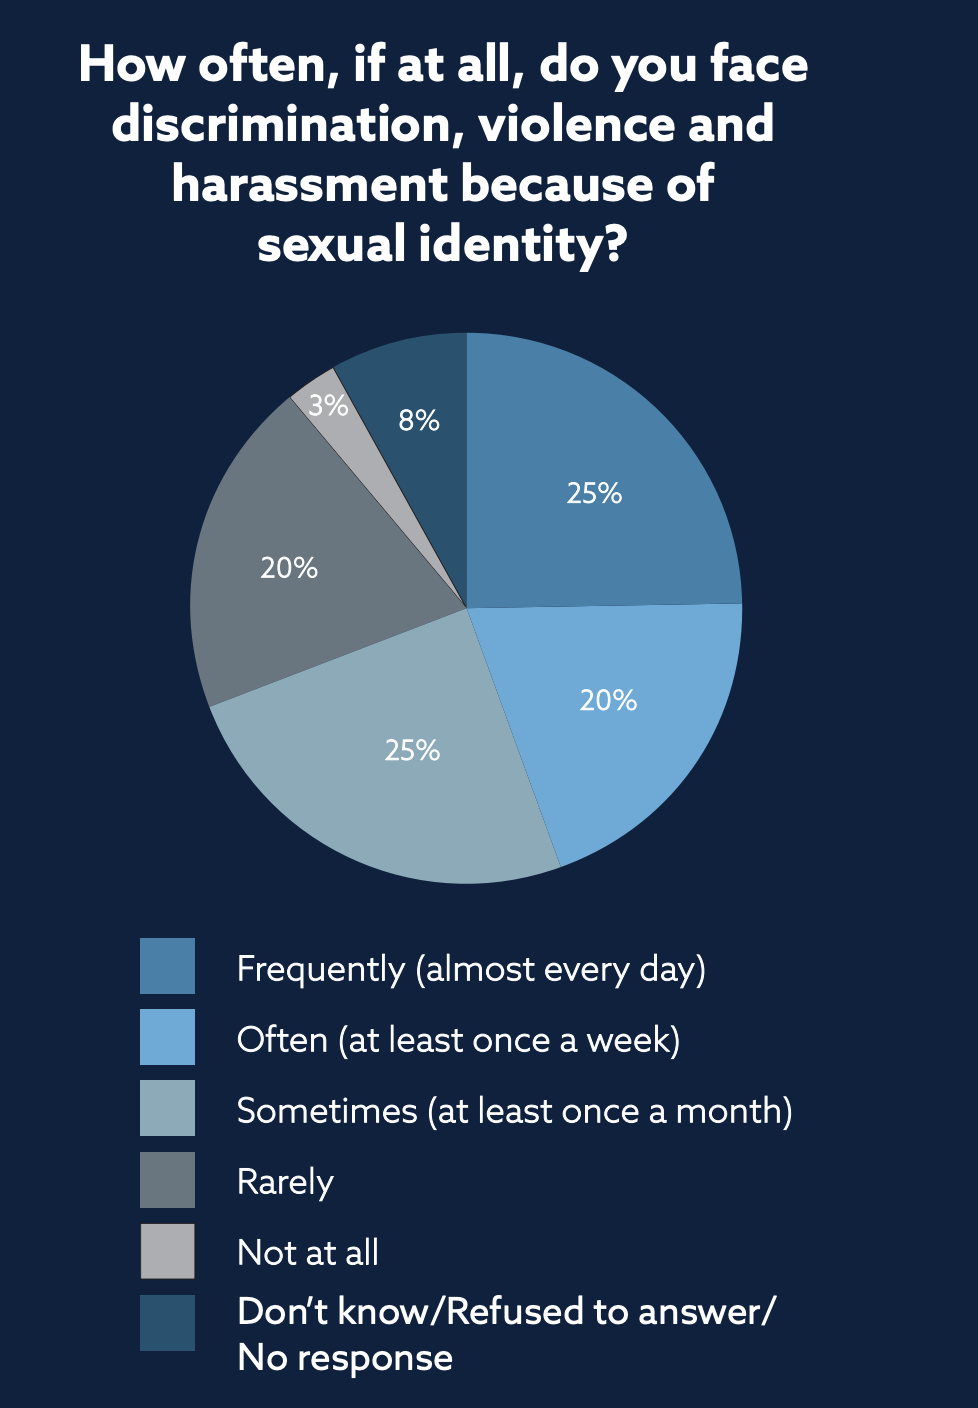 How often do you discrimination, violence, and harassment because of your sexual identity? Pie chart showing: Frequently (almost every day) 25%; Often (at least once a week) 20%; Sometimes (at least once a month) 25%; Rarely 20%; Not at all 3%.